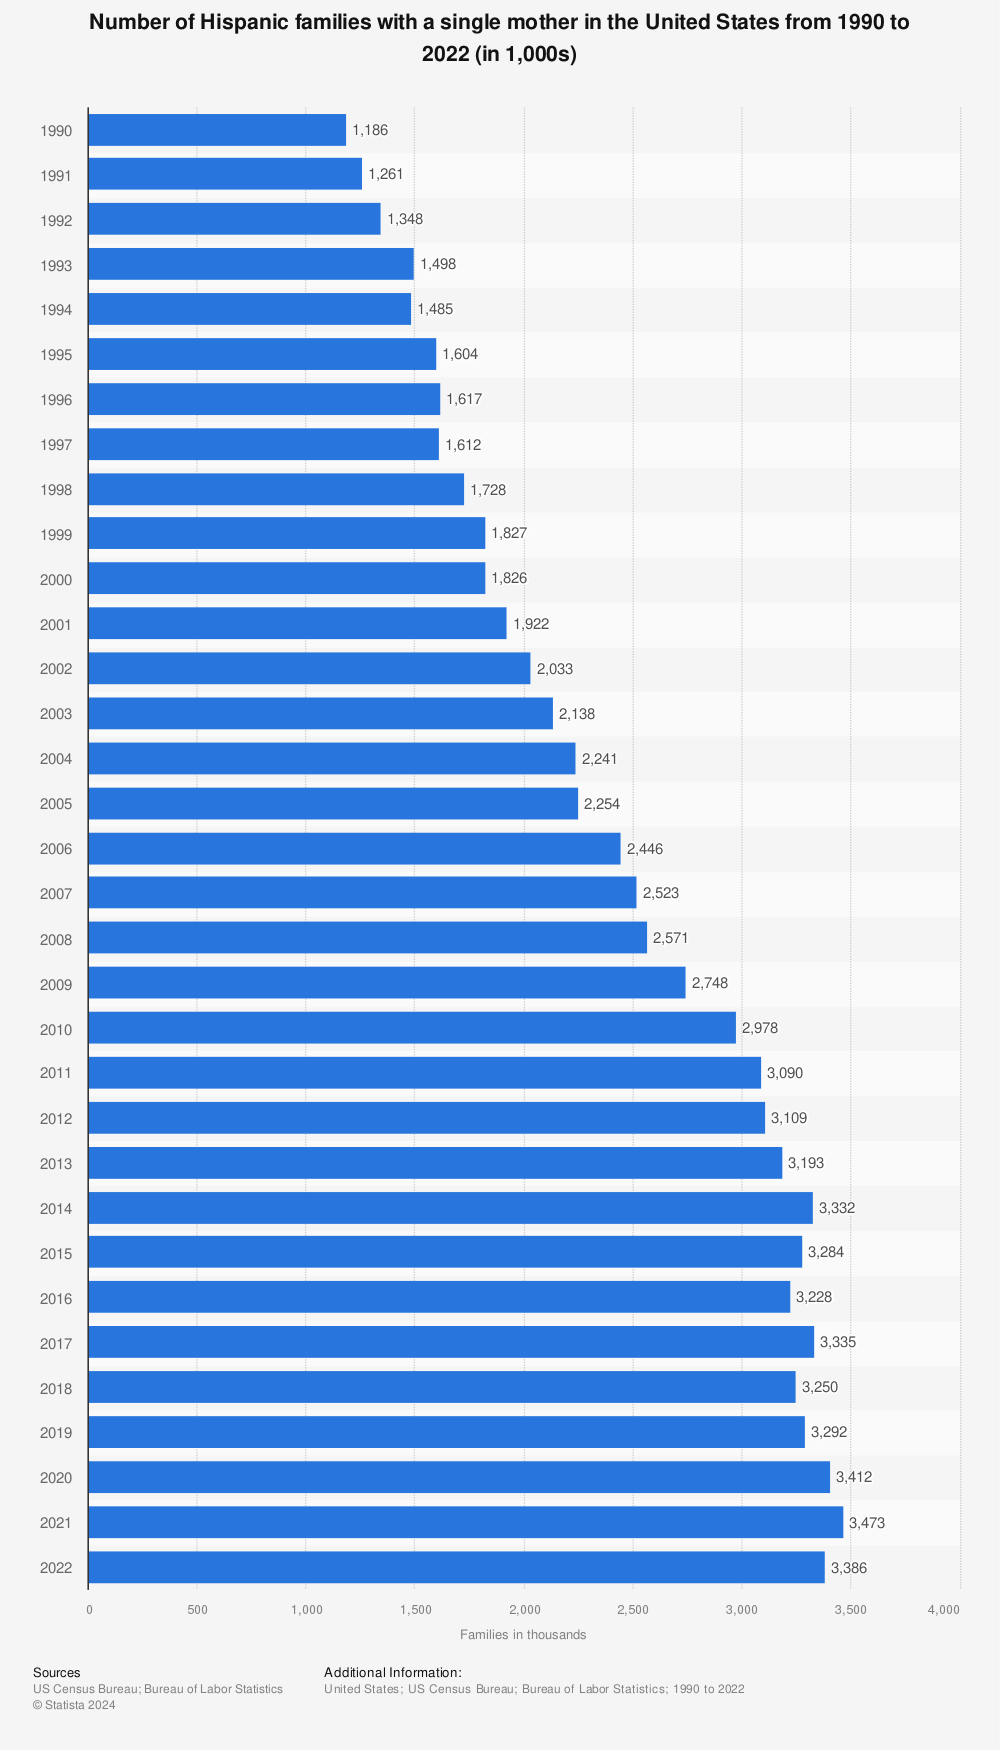 Statistic: Number of Hispanic families with a single mother in the U.S. from 1990 to 2020 (in 1,000s) | Statista